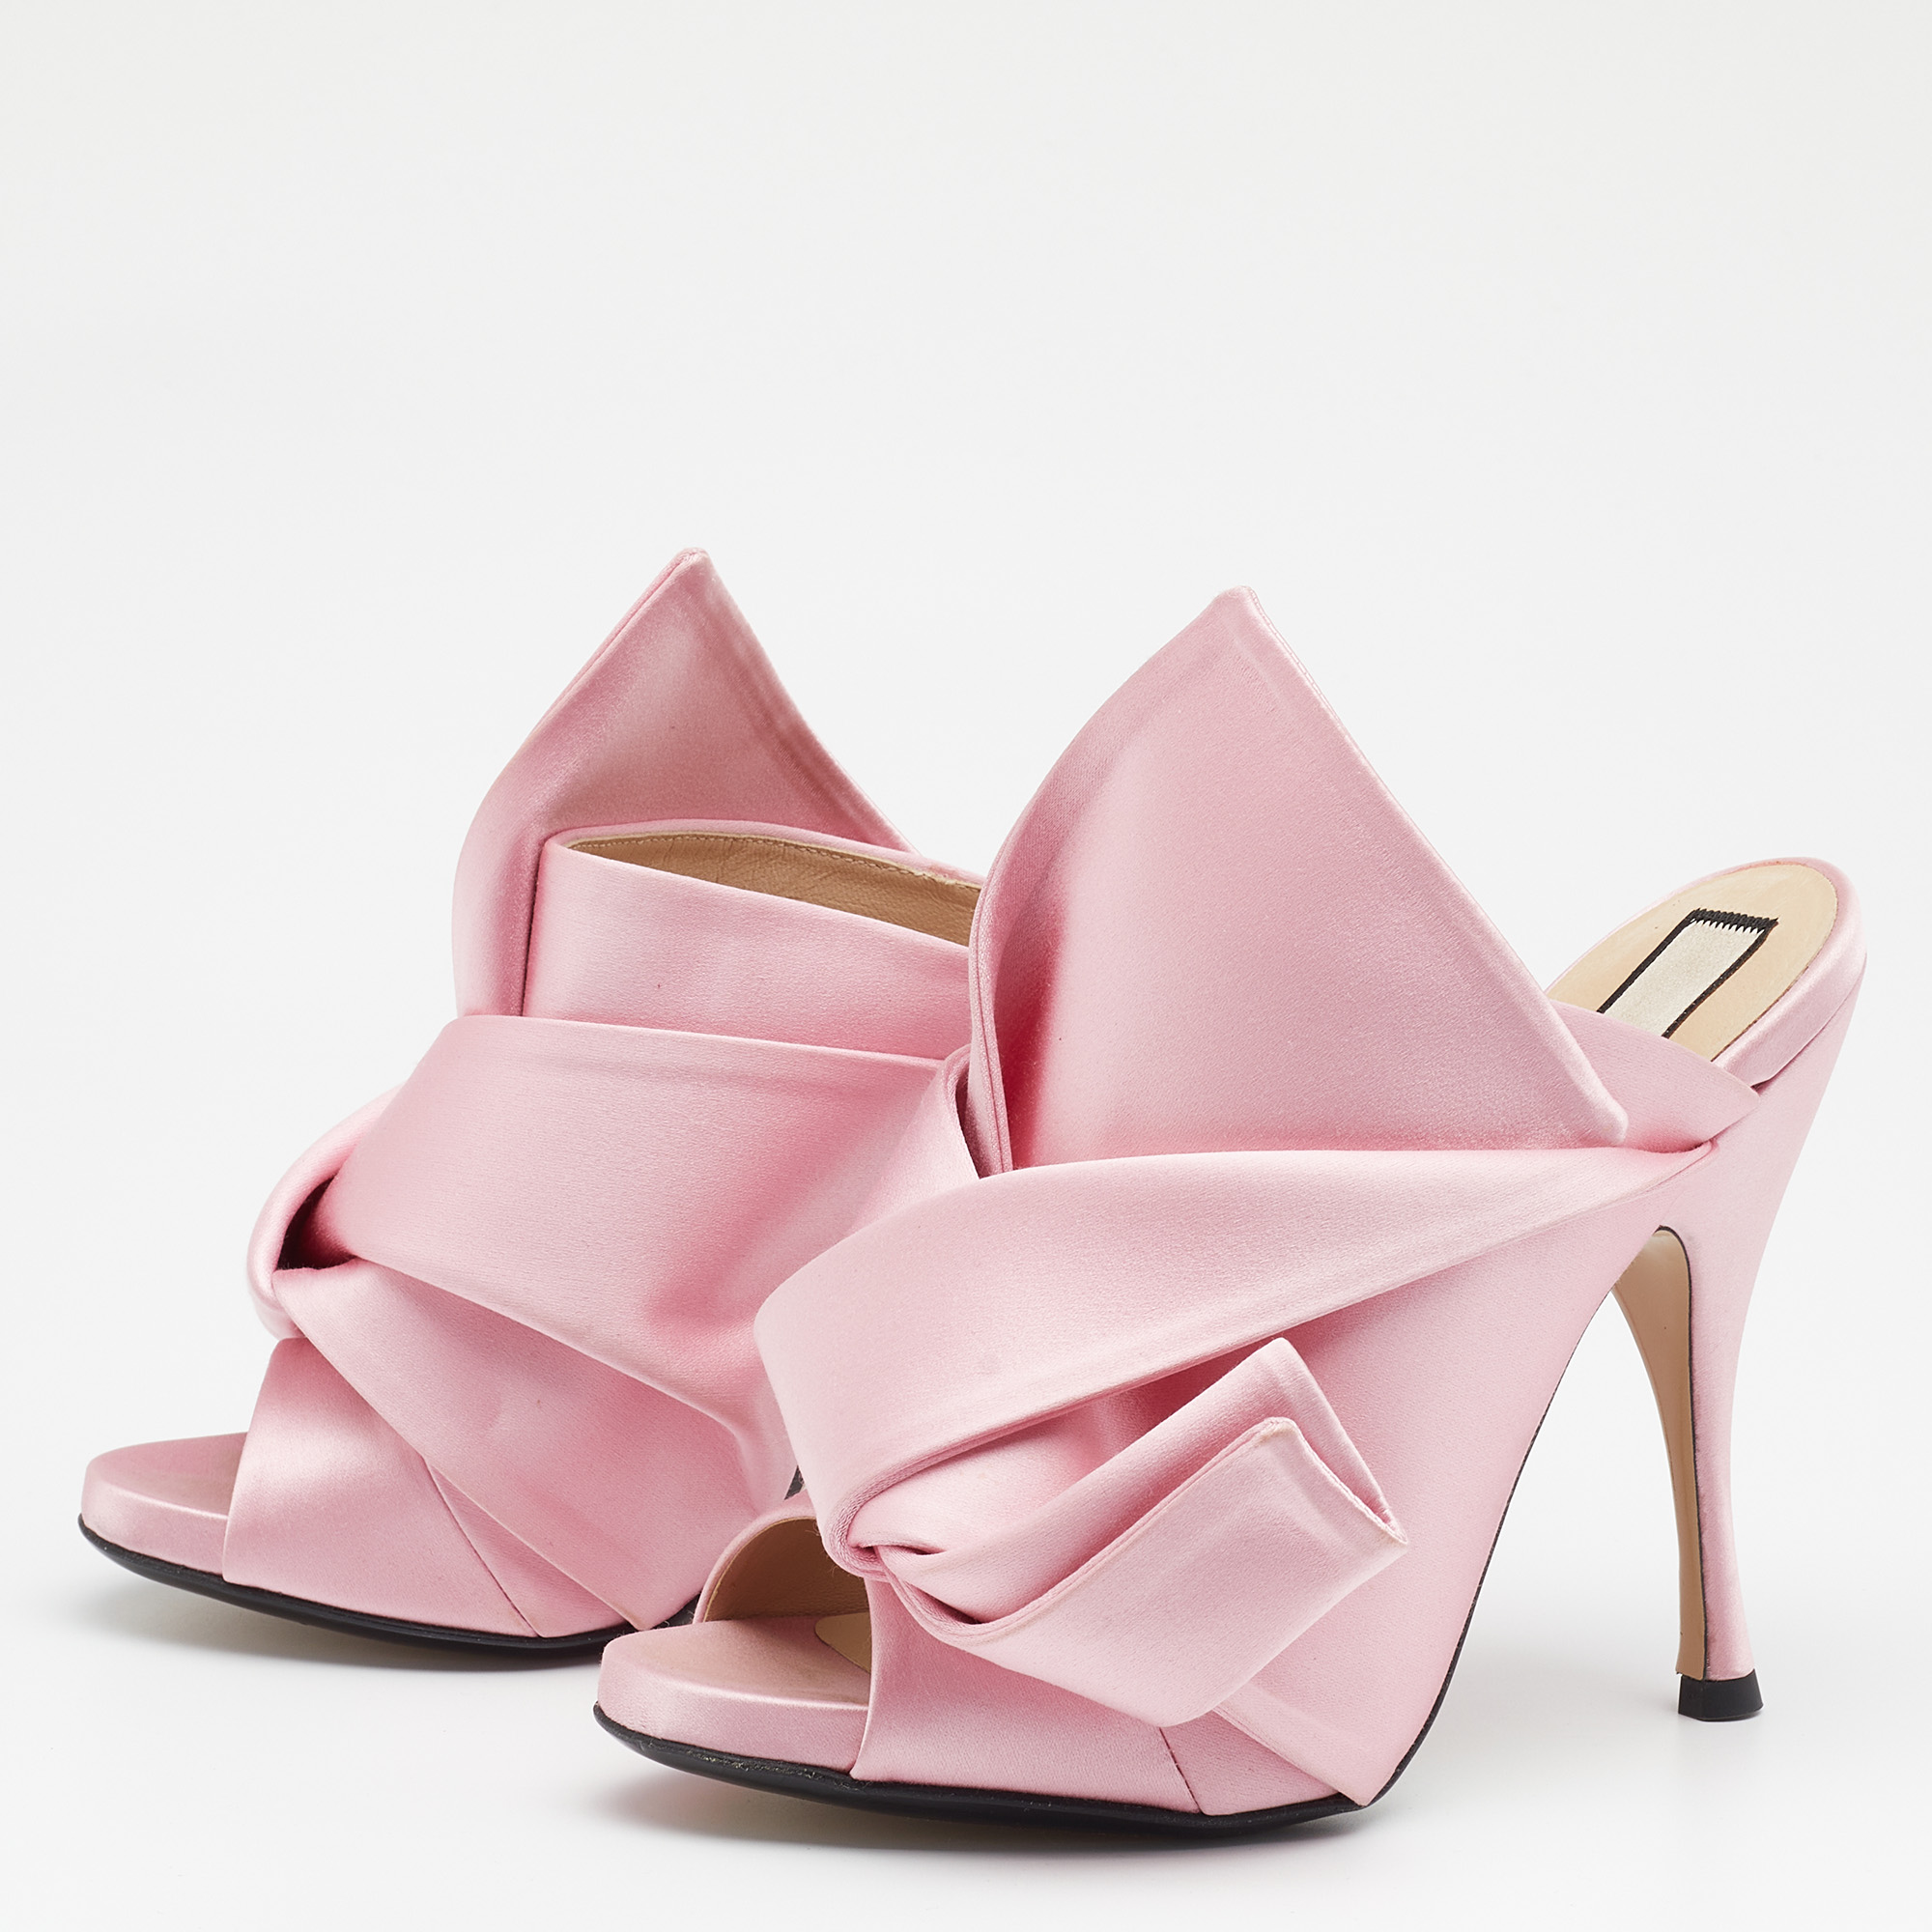 

Nº21 Pink Satin Raso Knotted Mules Size